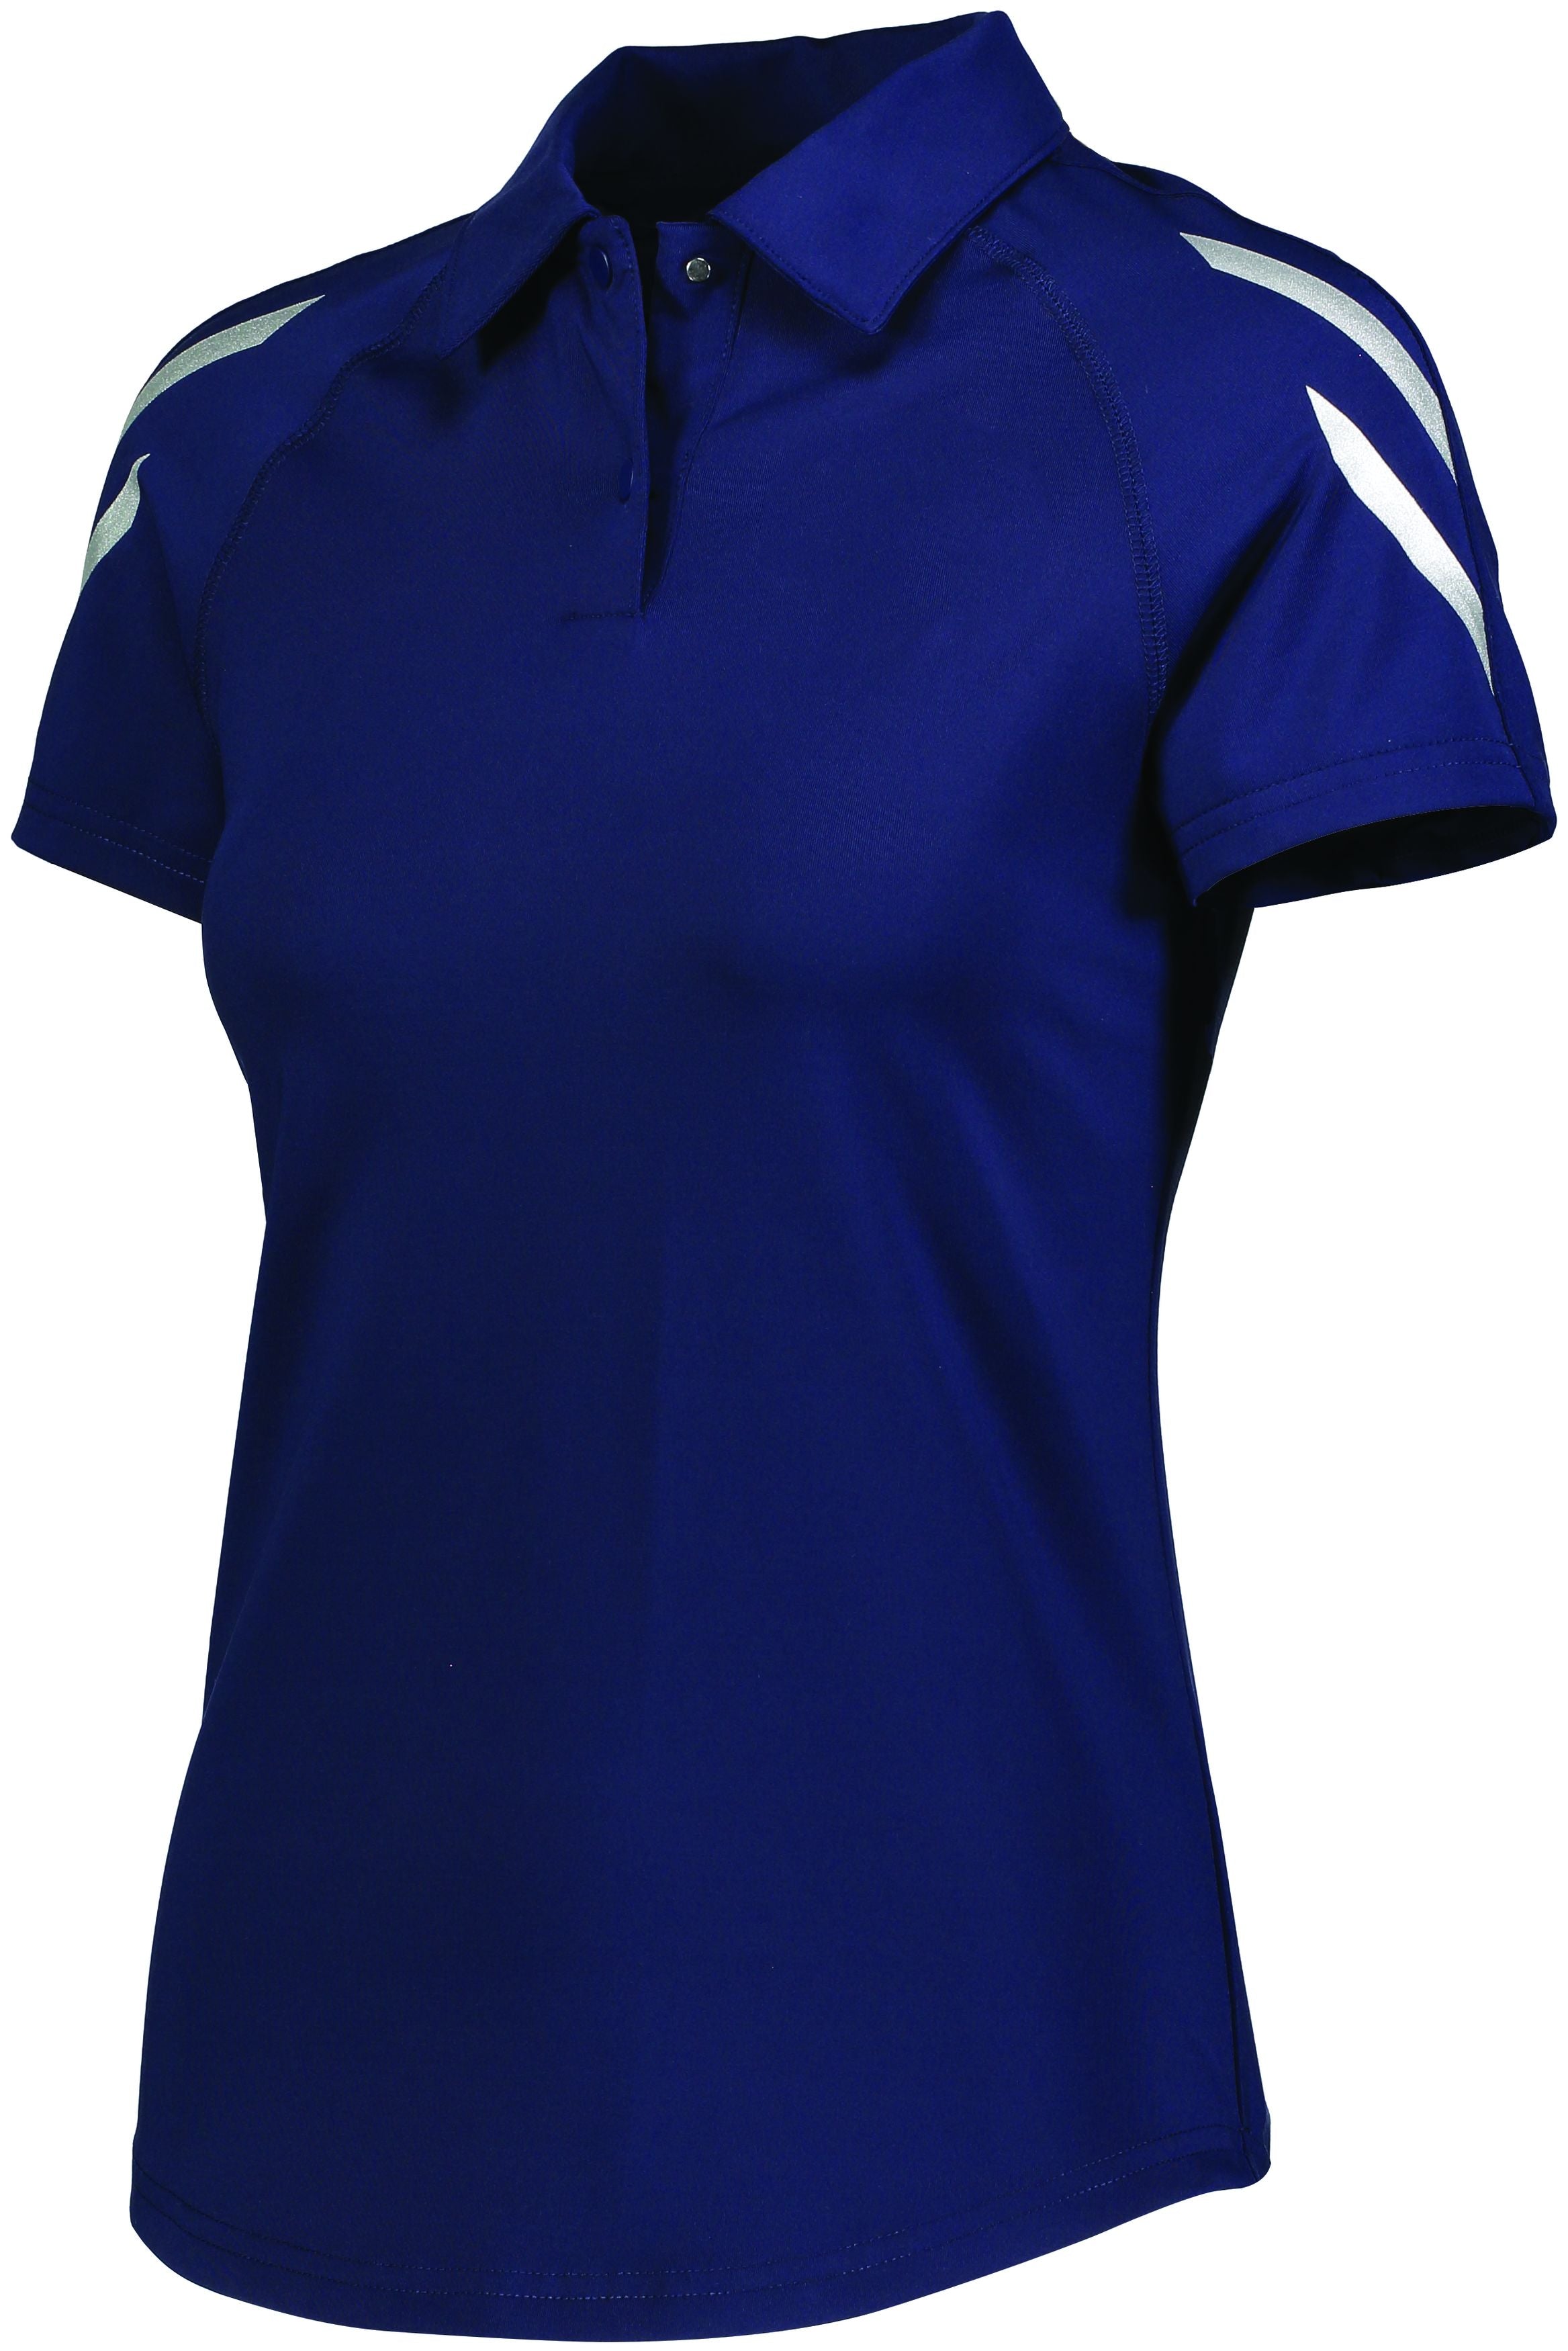 Holloway Ladies Flux Polo in Navy  -Part of the Ladies, Ladies-Polo, Polos, Holloway, Shirts, Flux-Collection, Corporate-Collection product lines at KanaleyCreations.com